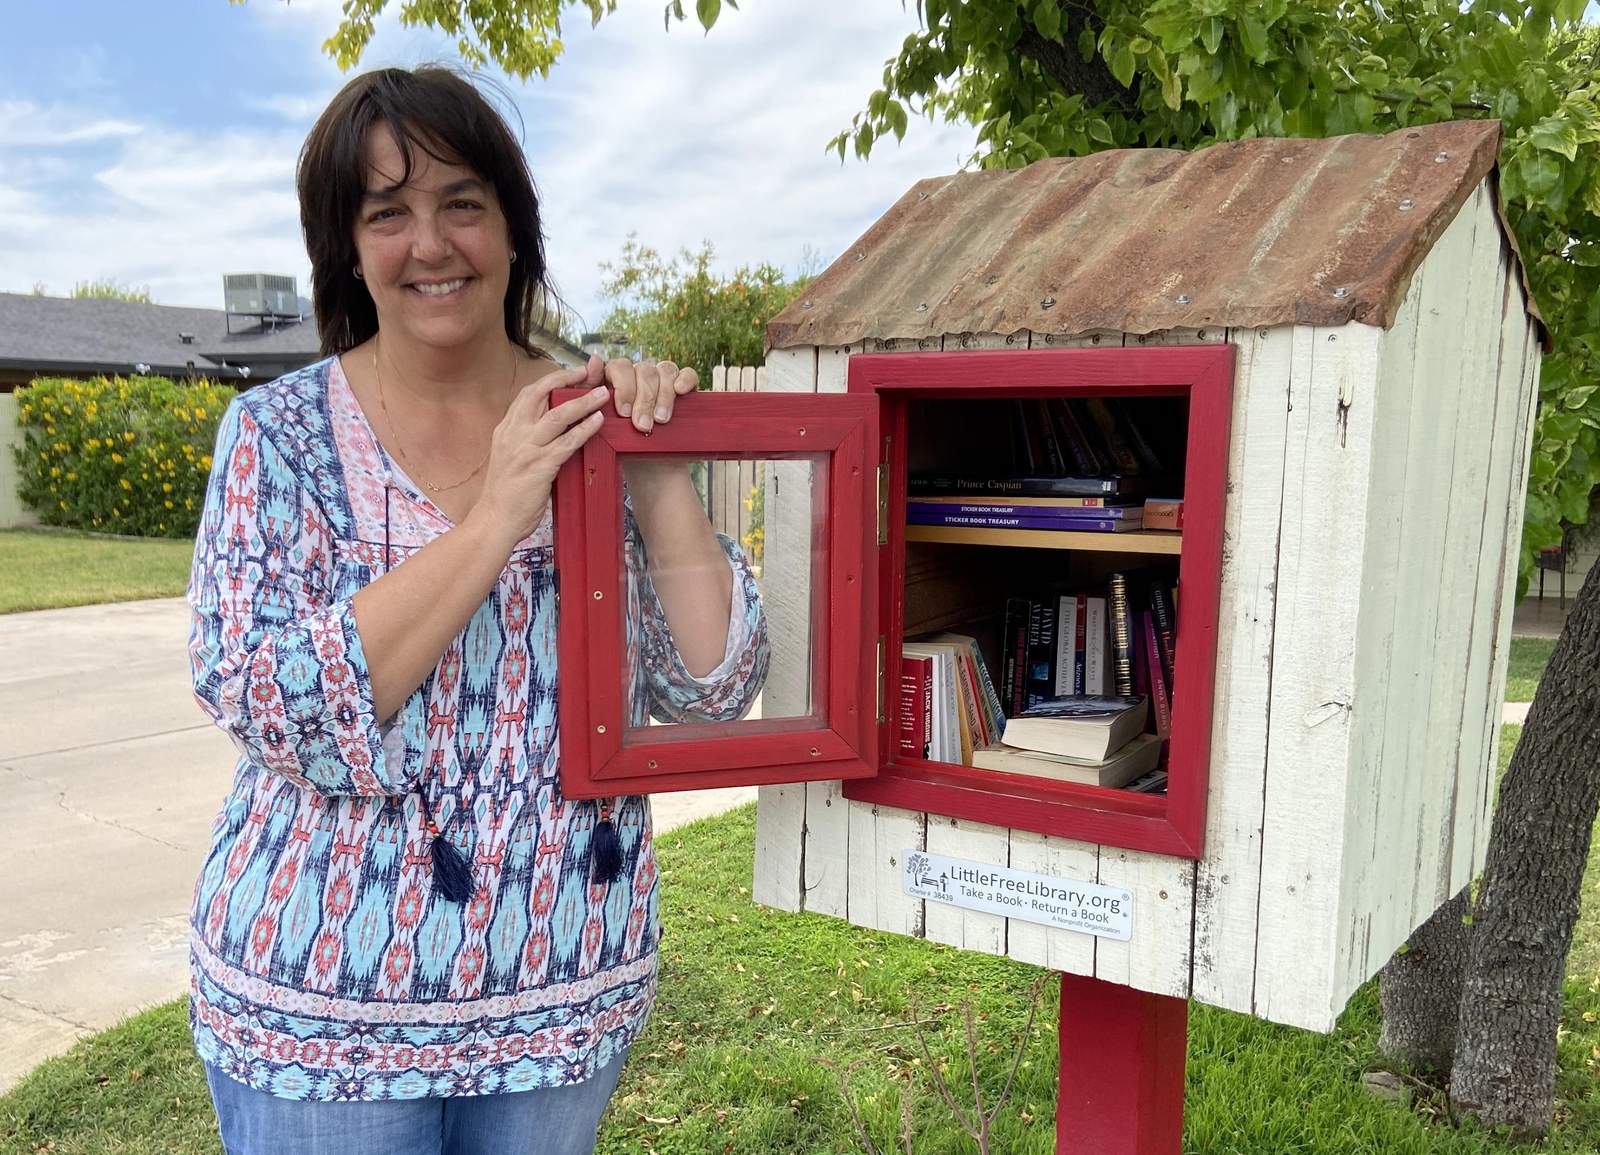 Small free libraries offering solace amid virus shutdowns